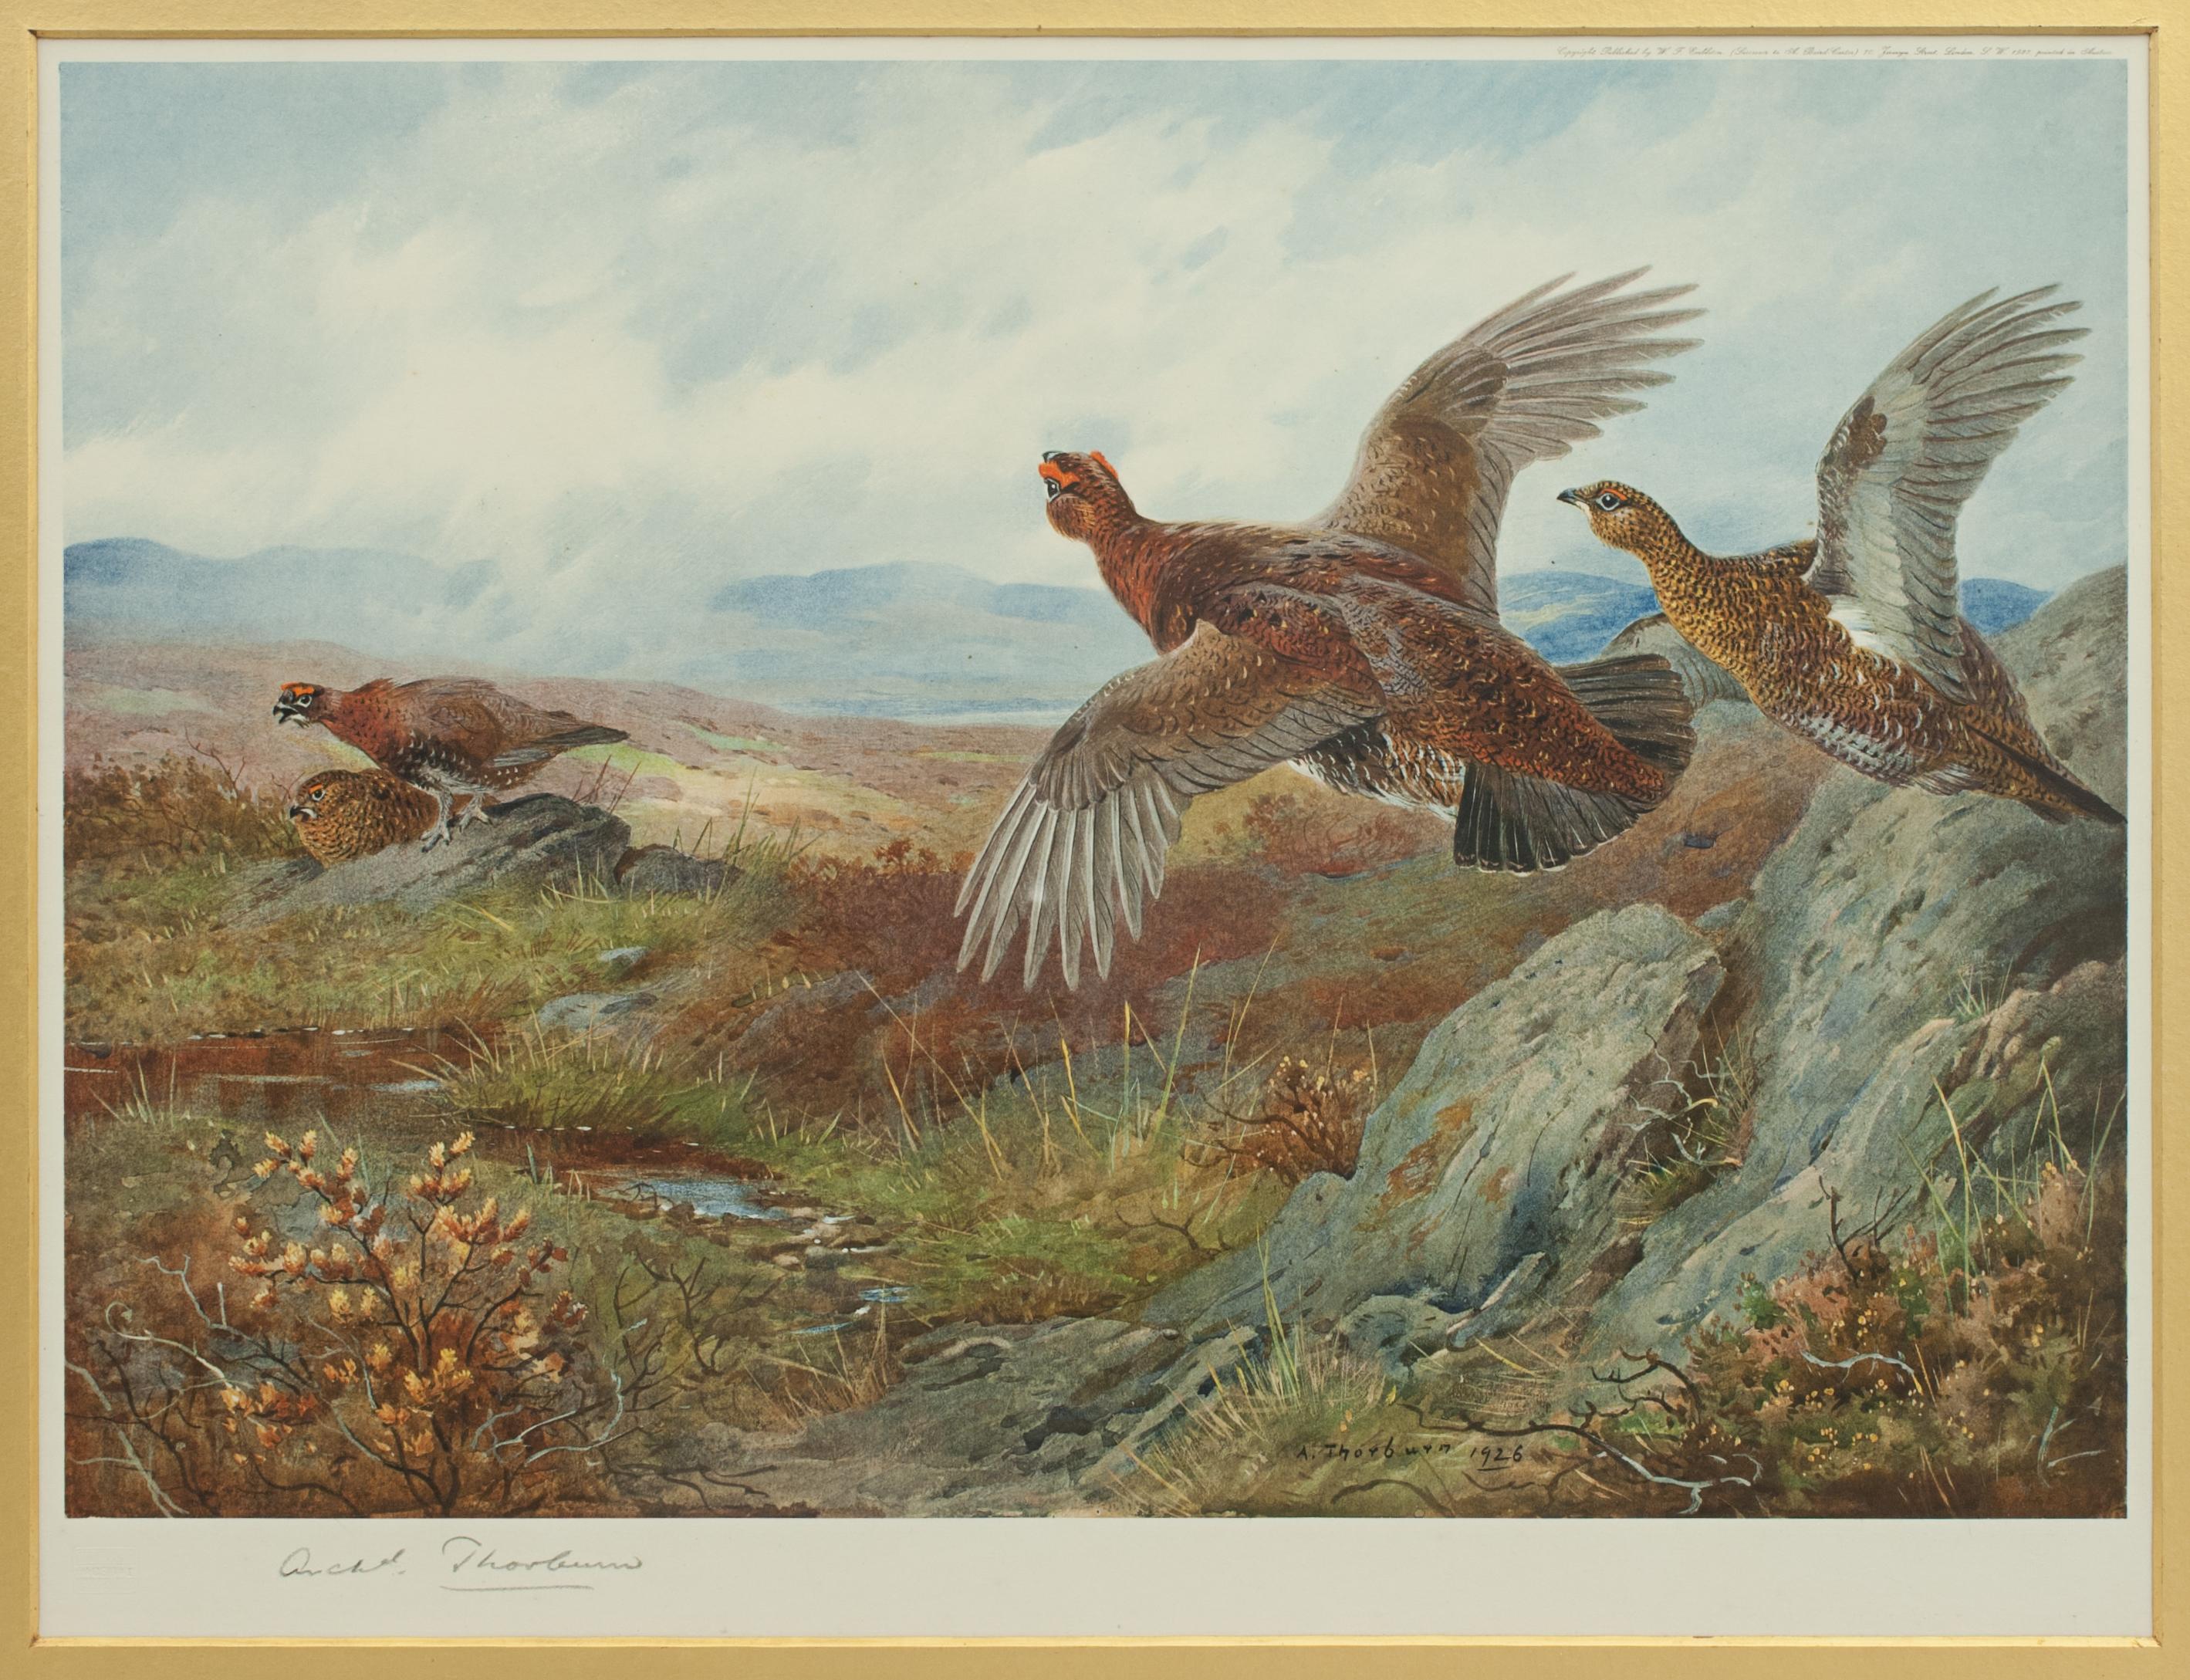 Sporting Art Antique Shooting Picture Game Birds by Archibald Thorburn 1927